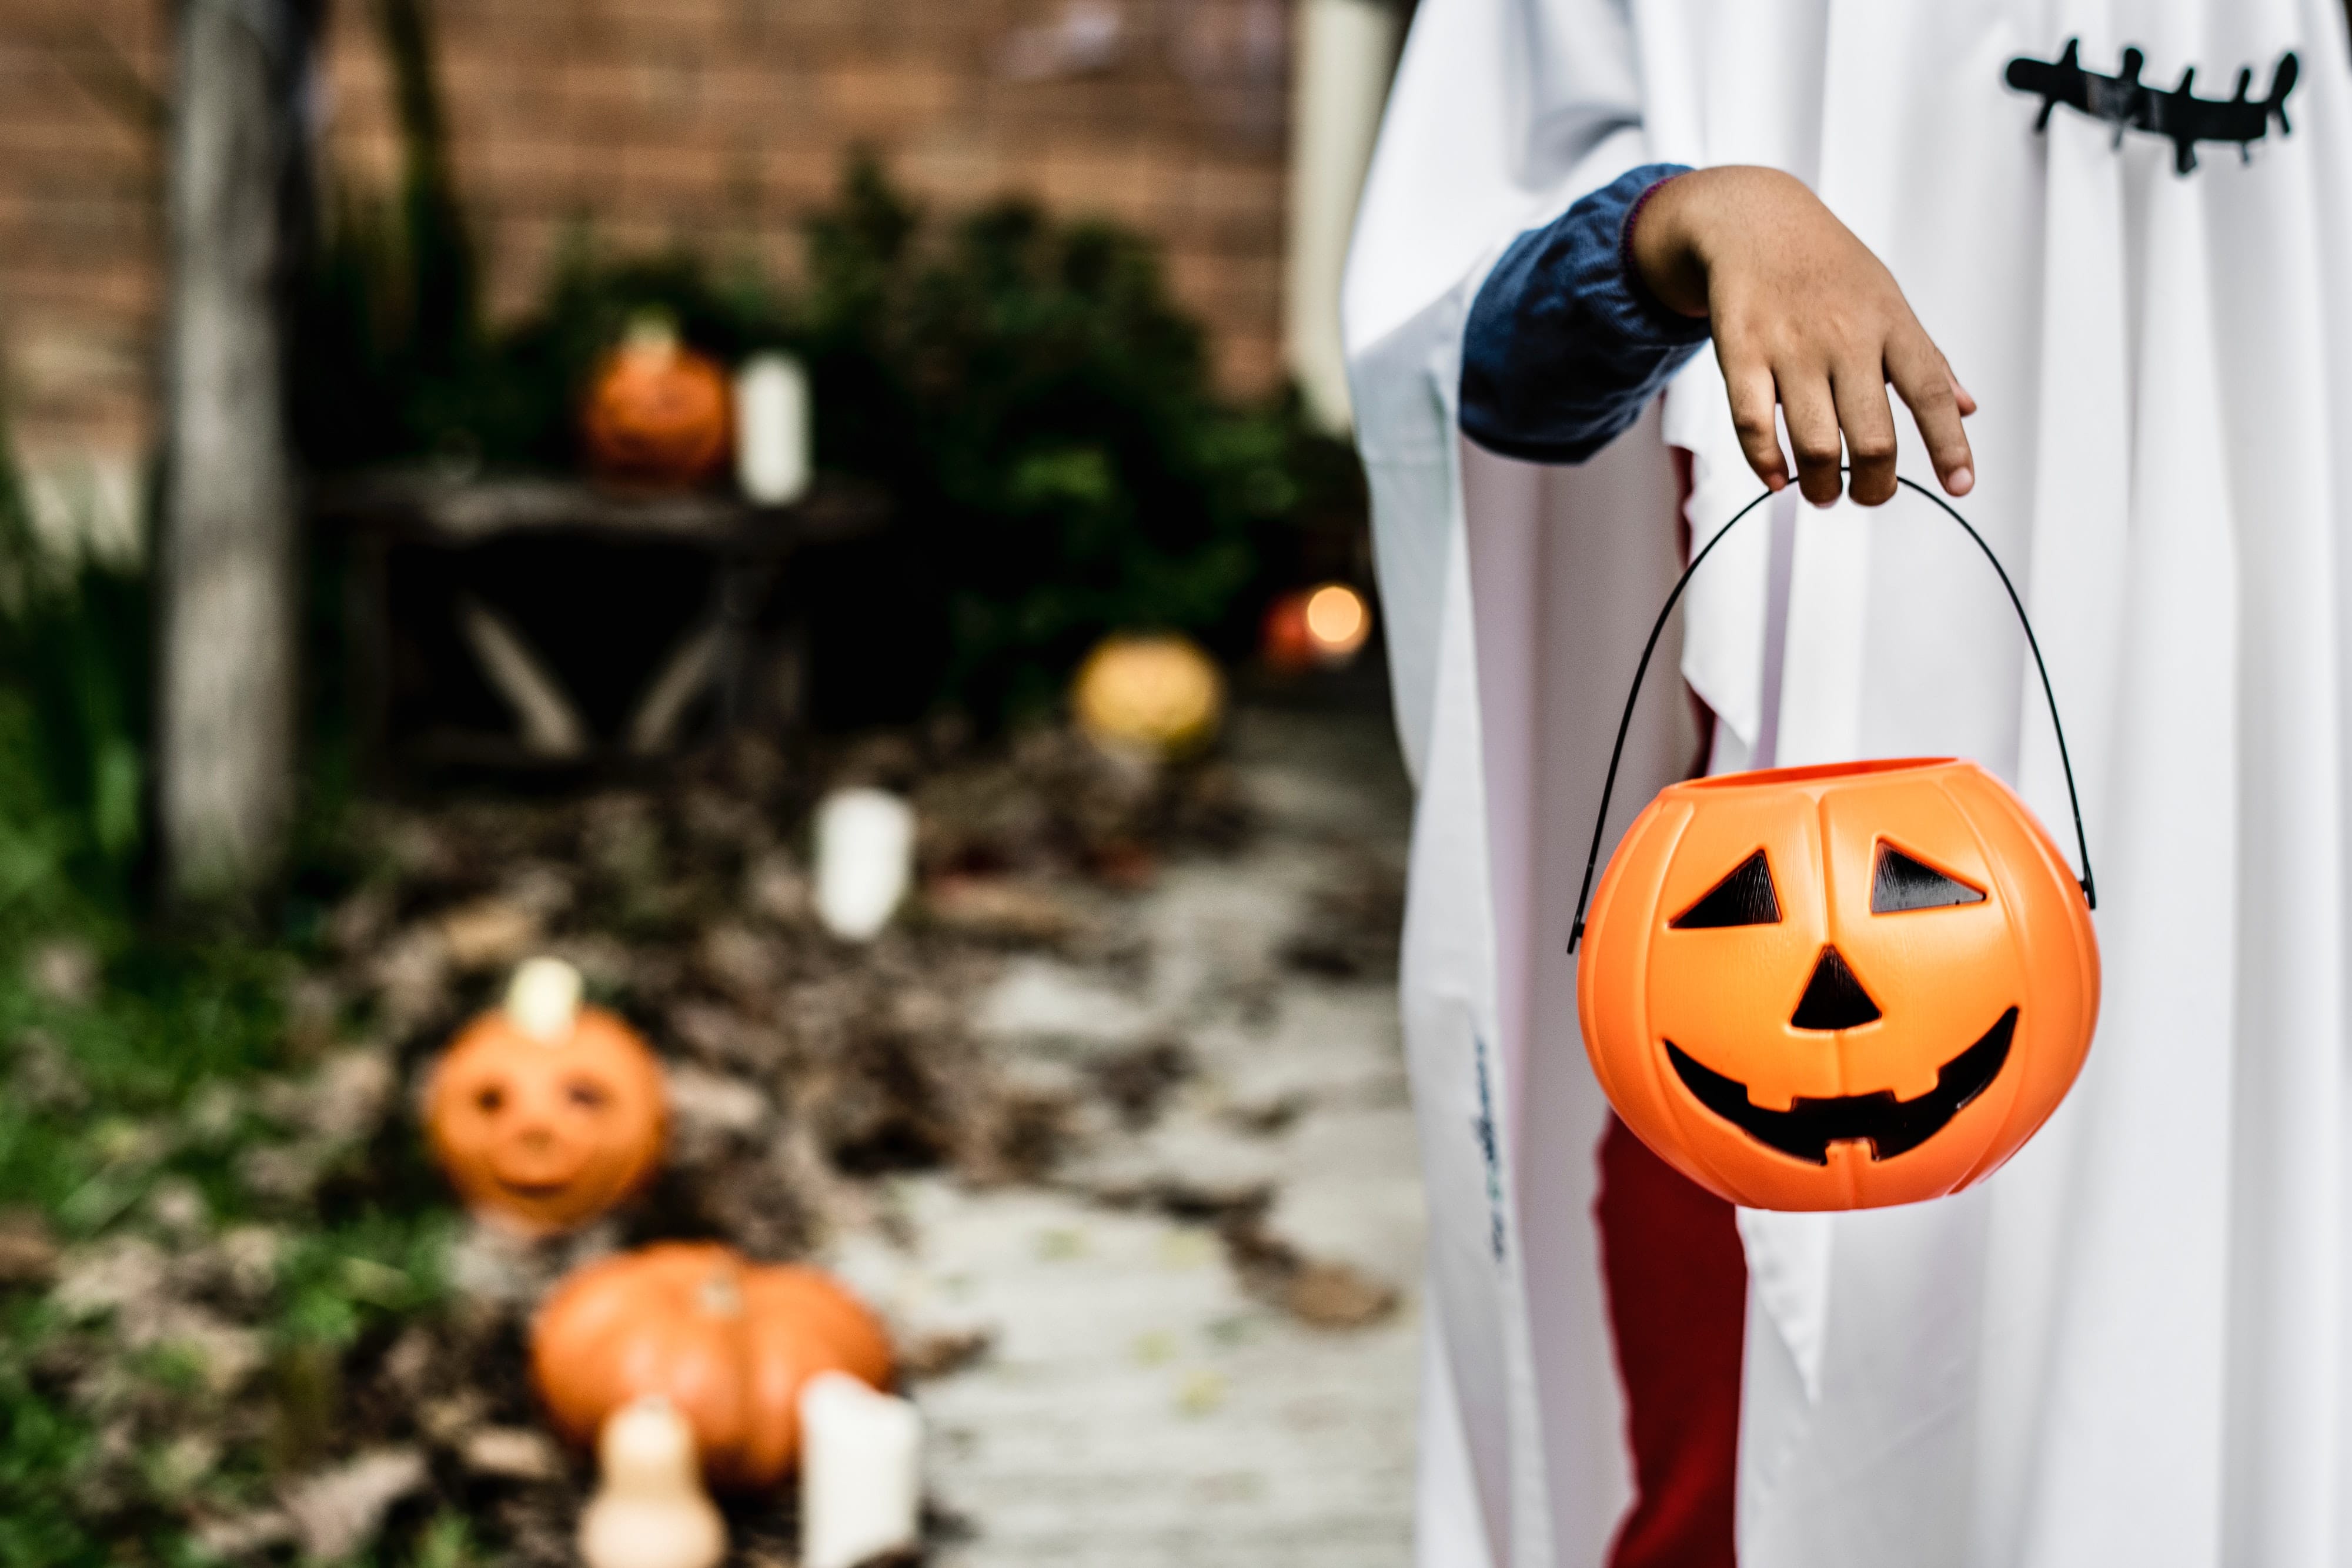 Child dressed in costume holds out a pumpkin pail during a stop on the trick-or-treat trail